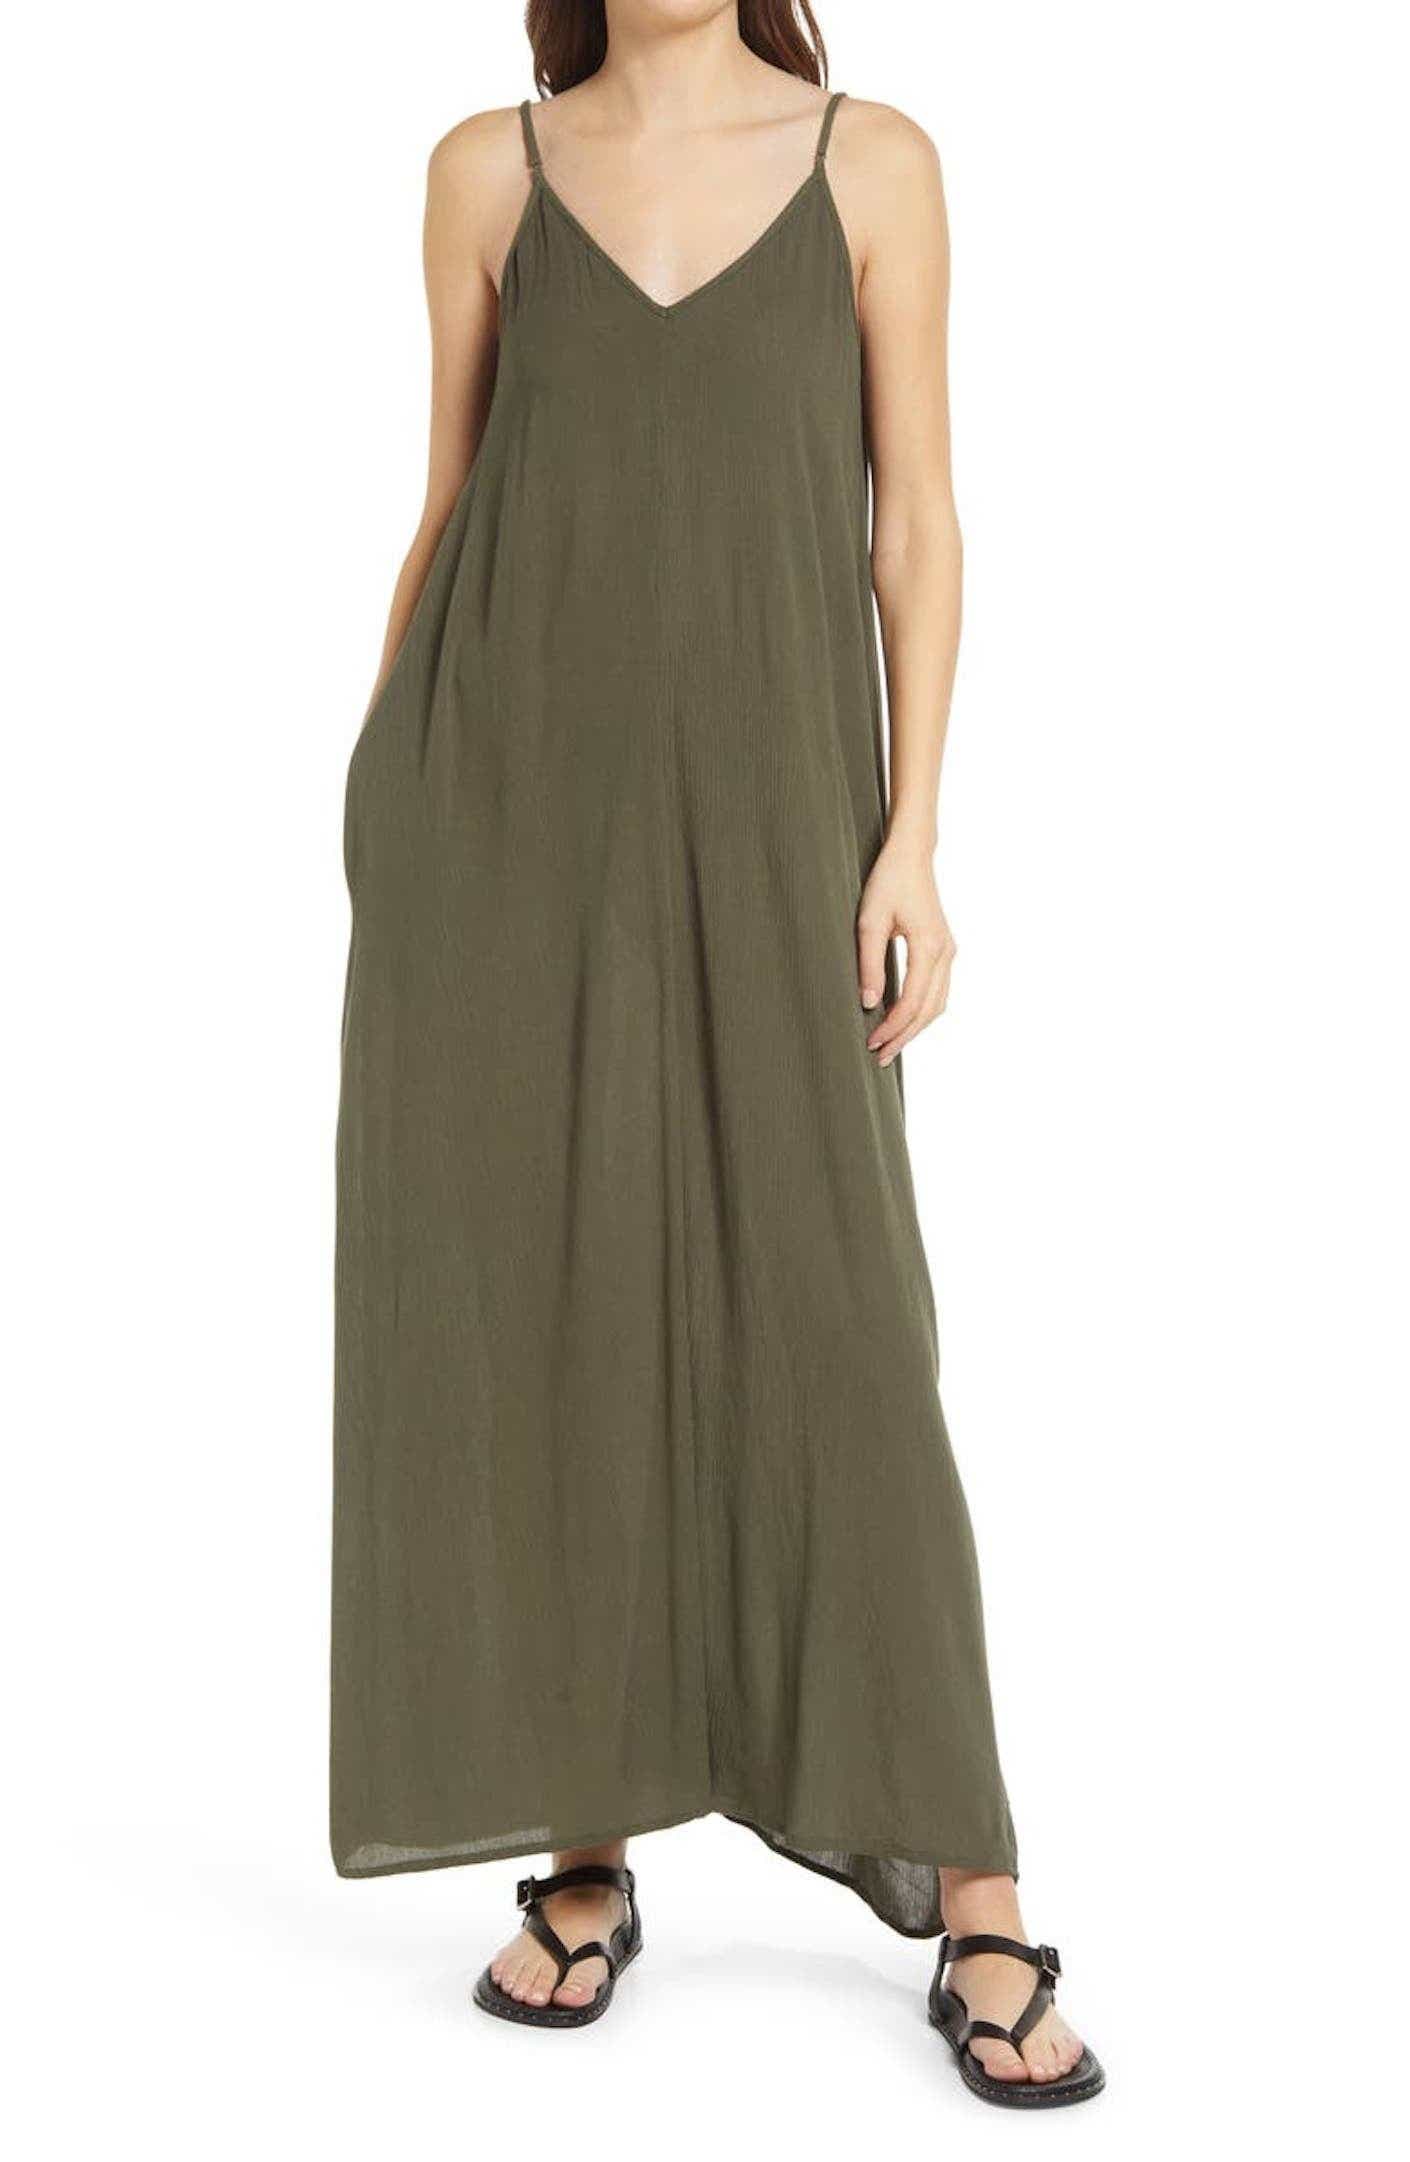 A person wearing a flowy, olive green maxi dress.